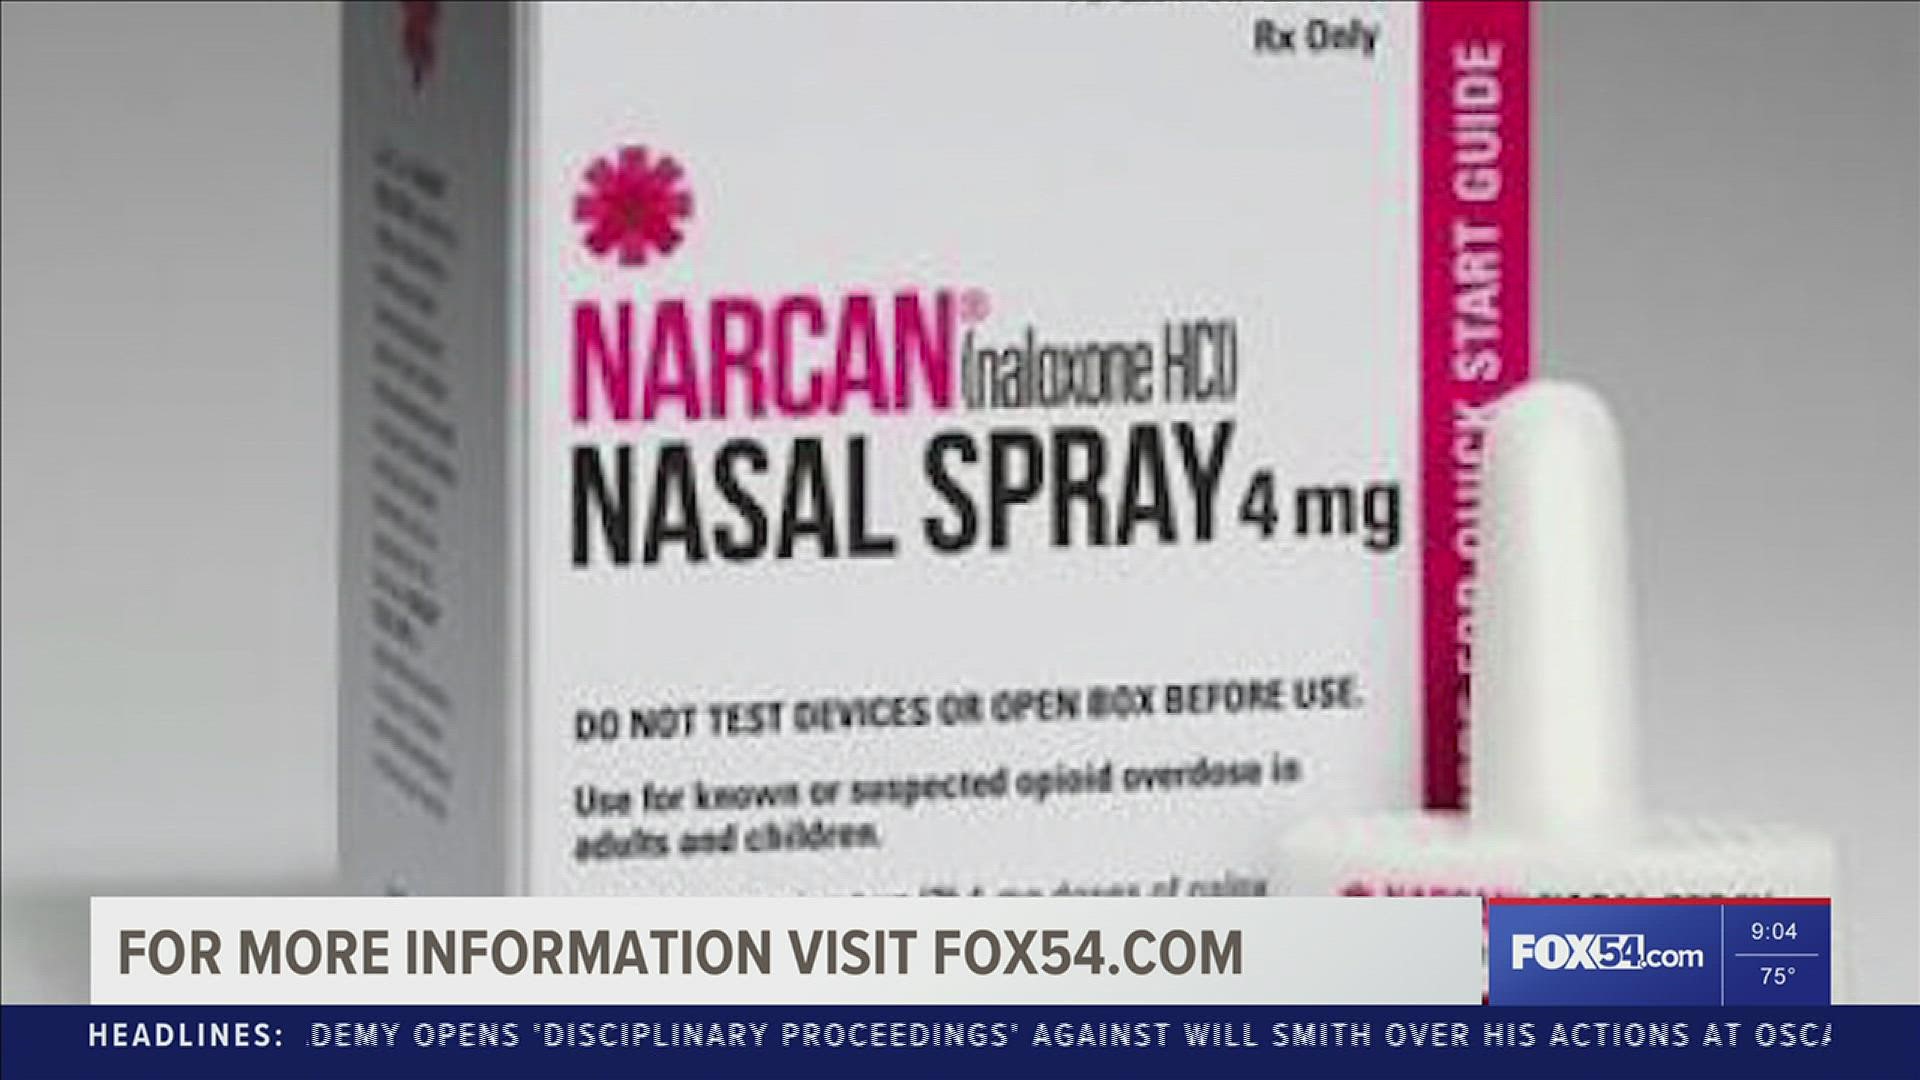 Narcan will continue to be used to save more lives in Madison county, AL.